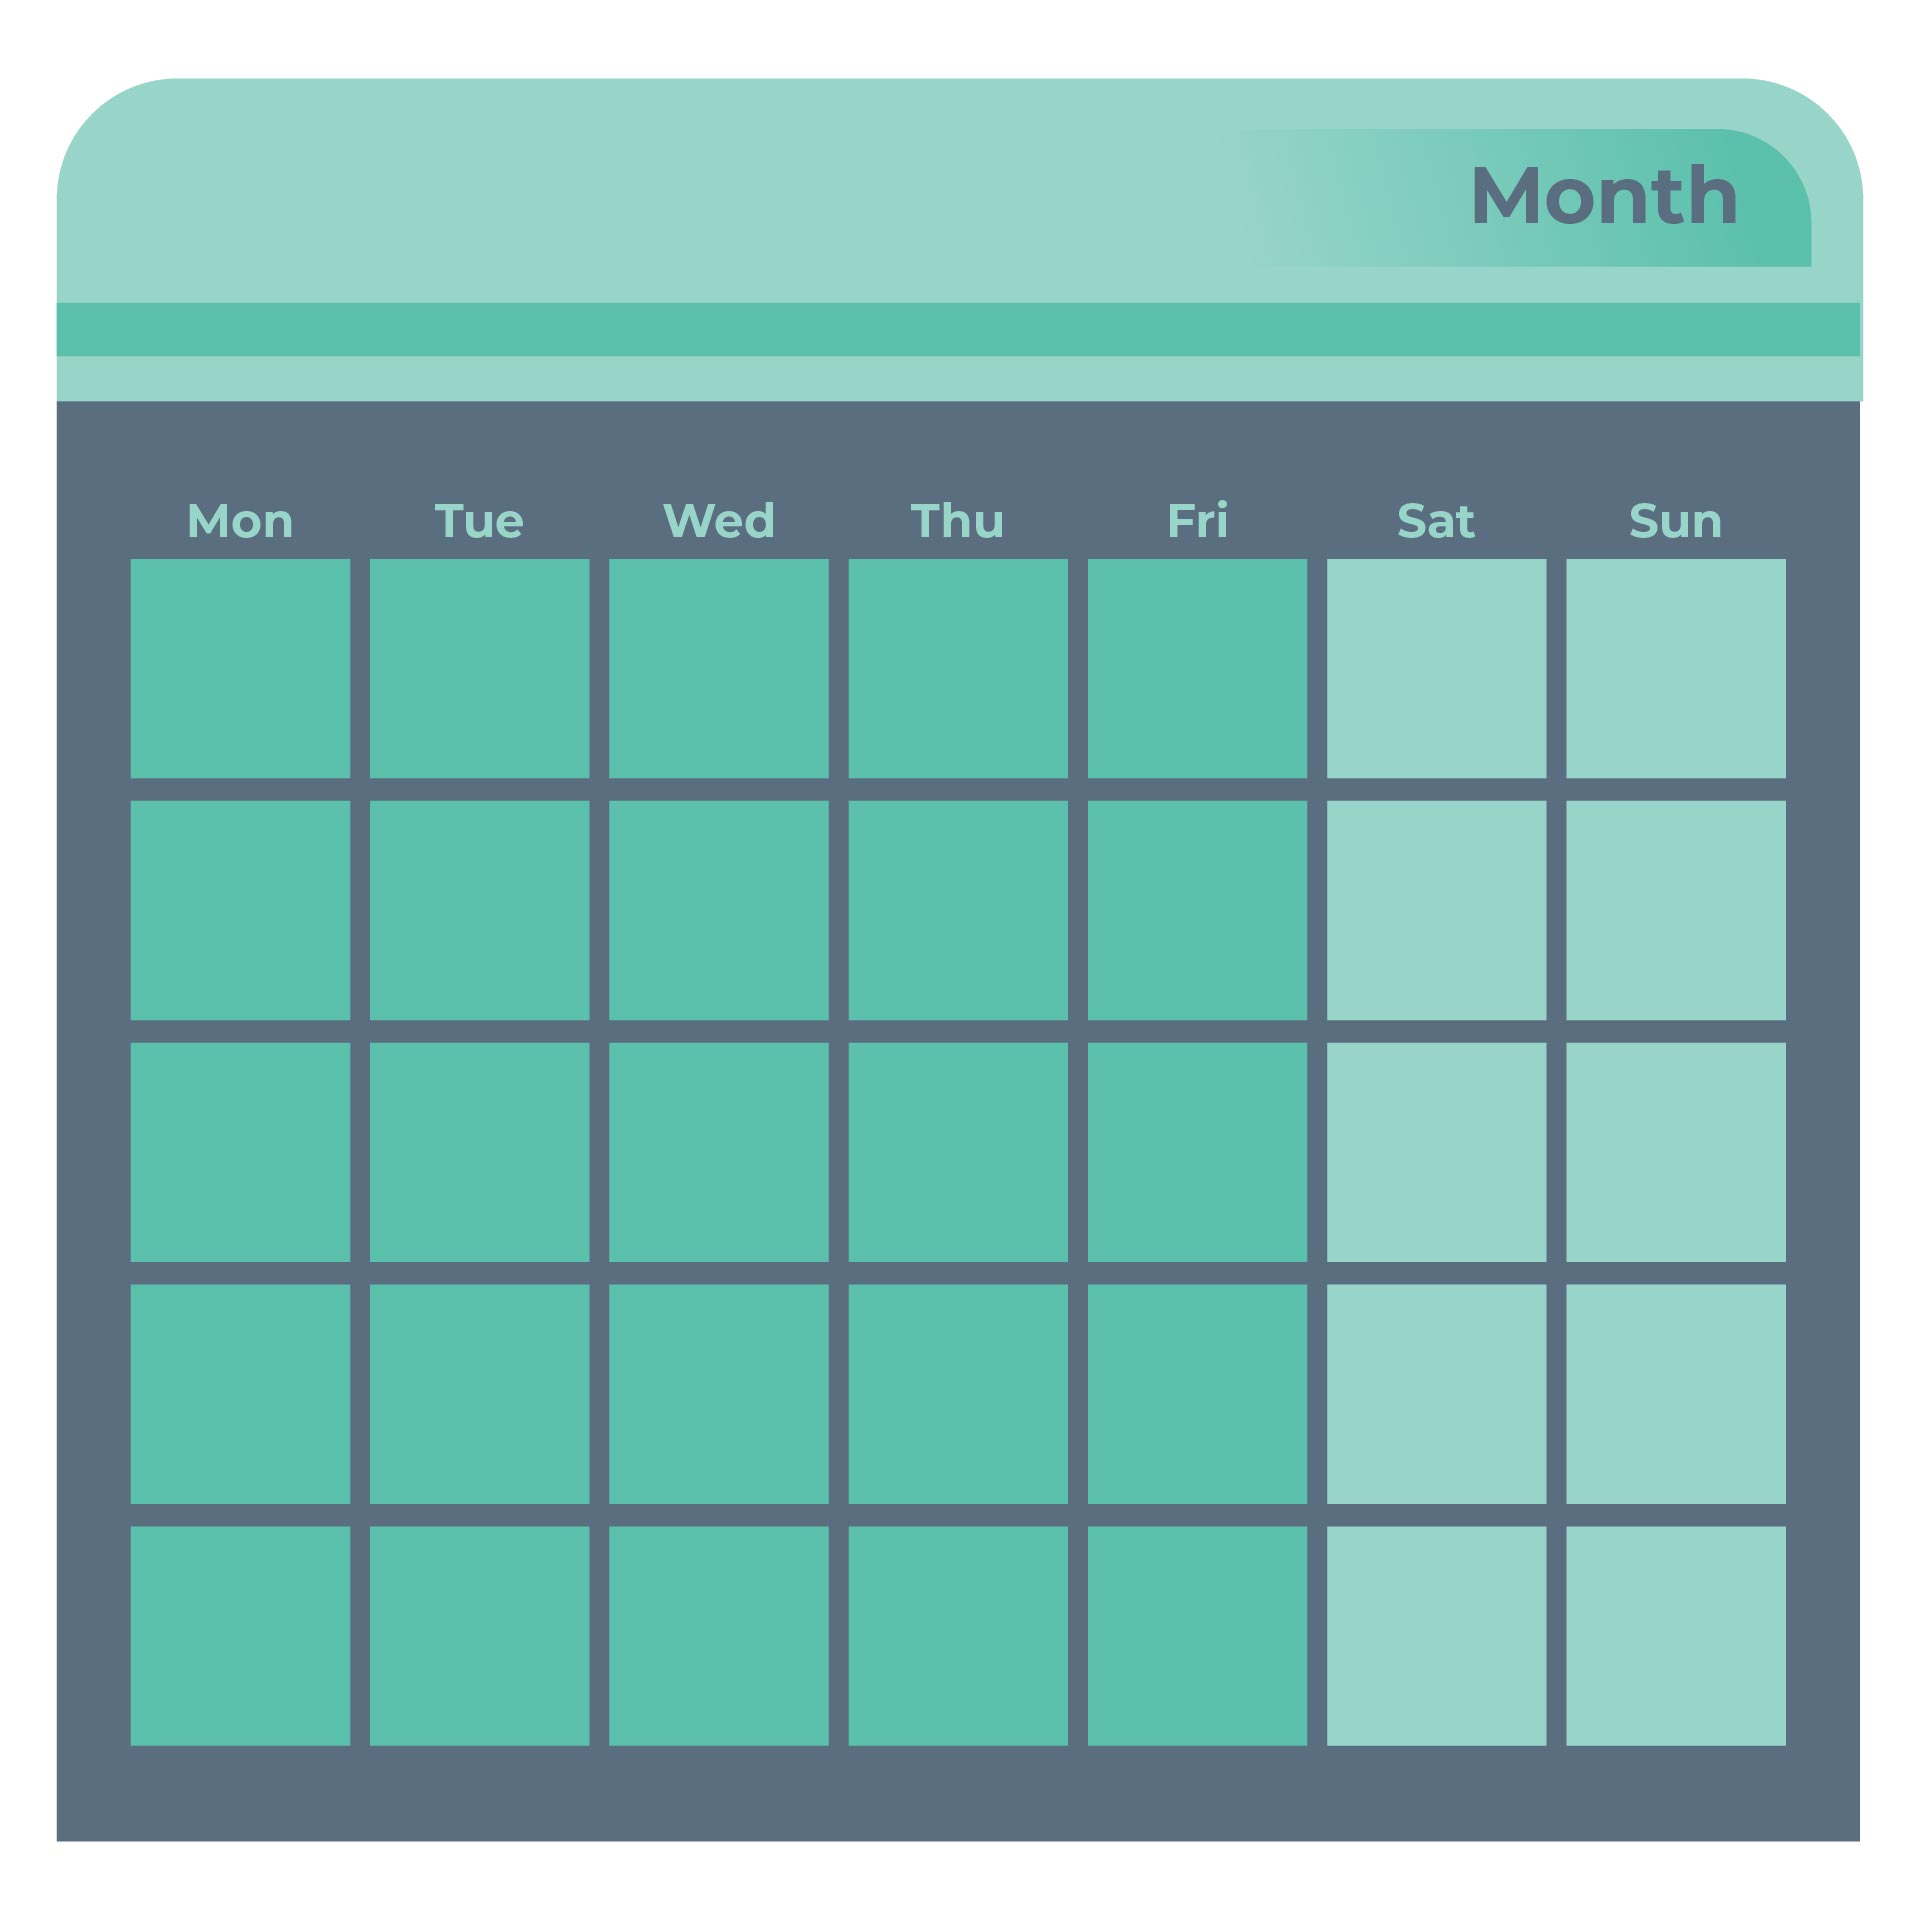 monday-friday-schedule-template-collection